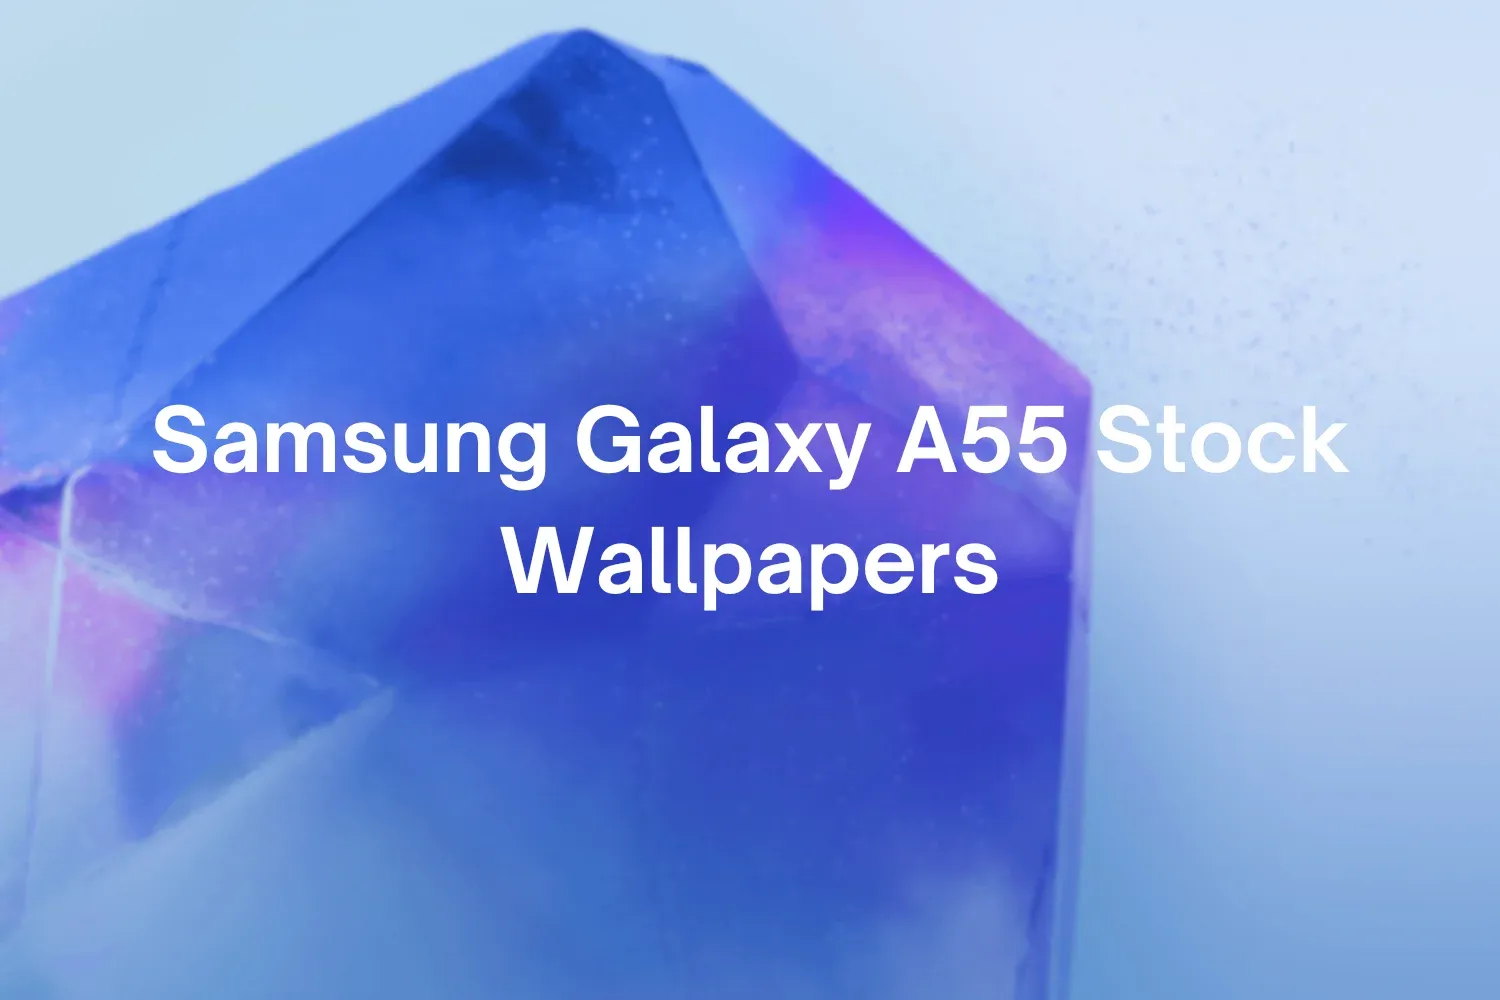 Download Samsung Galaxy A55 Stock Wallpapers in FHD+